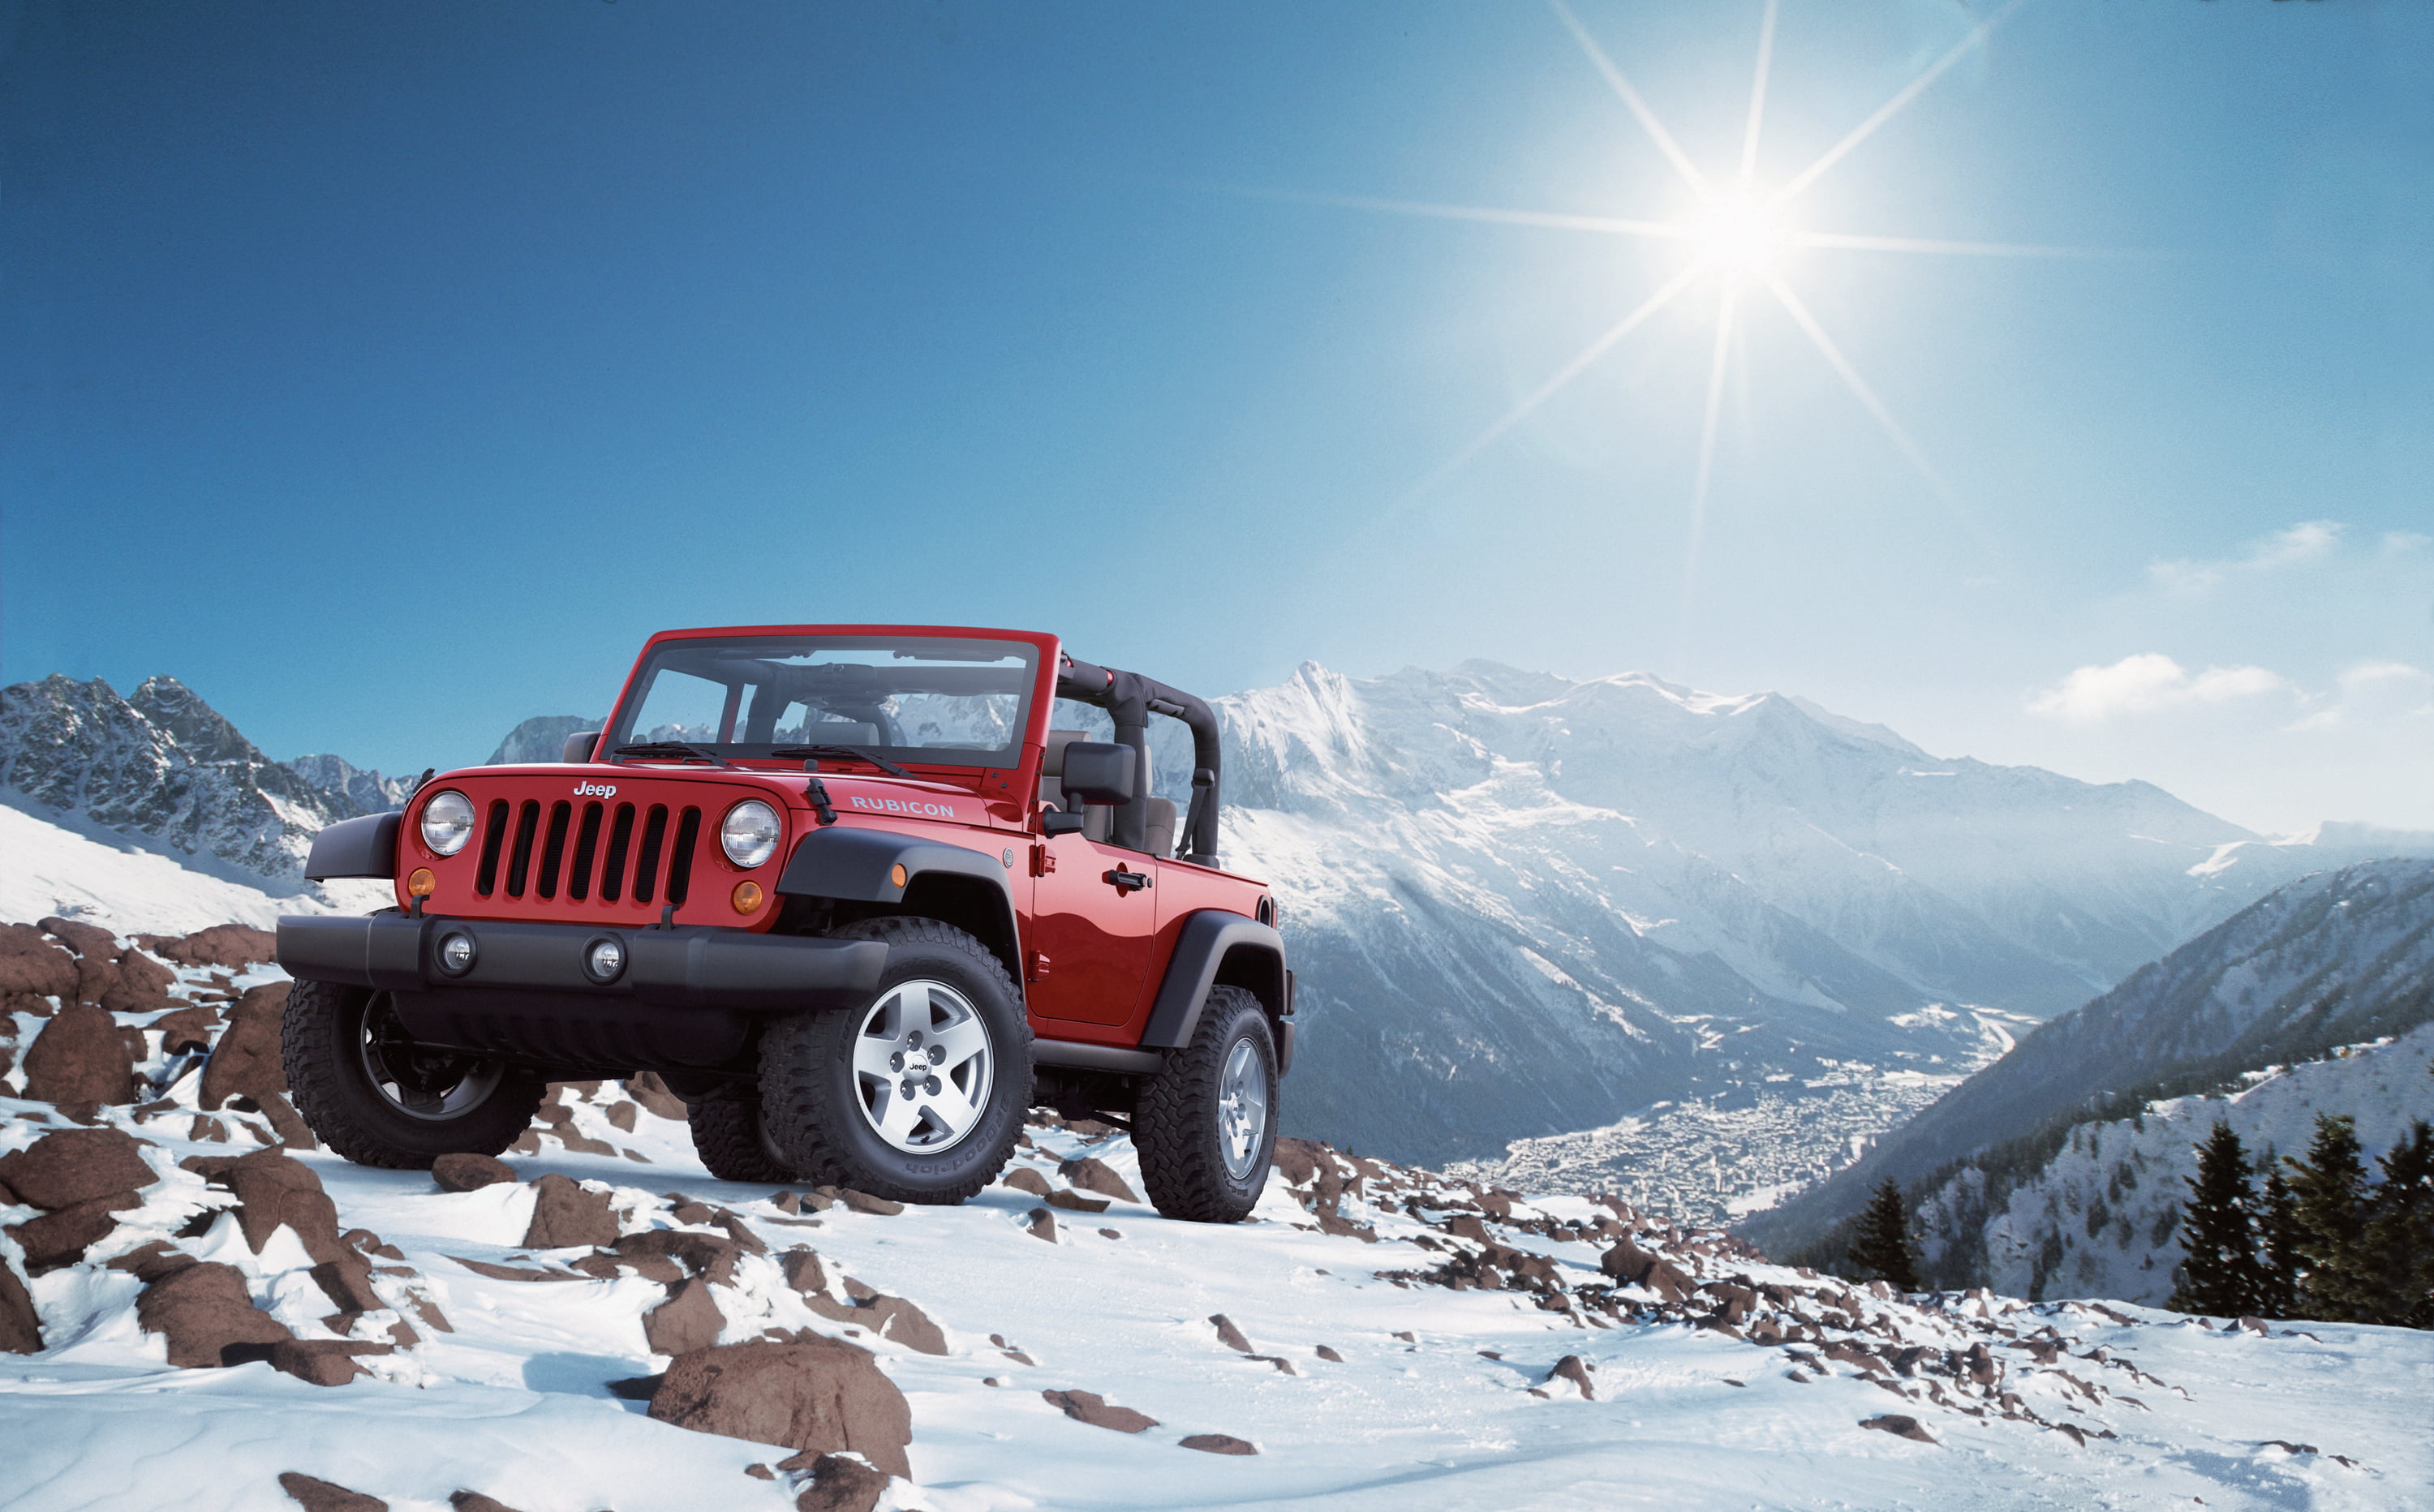 Jeep Wrangler, red Jeep Wrangler, Cars, snow, cold temperature